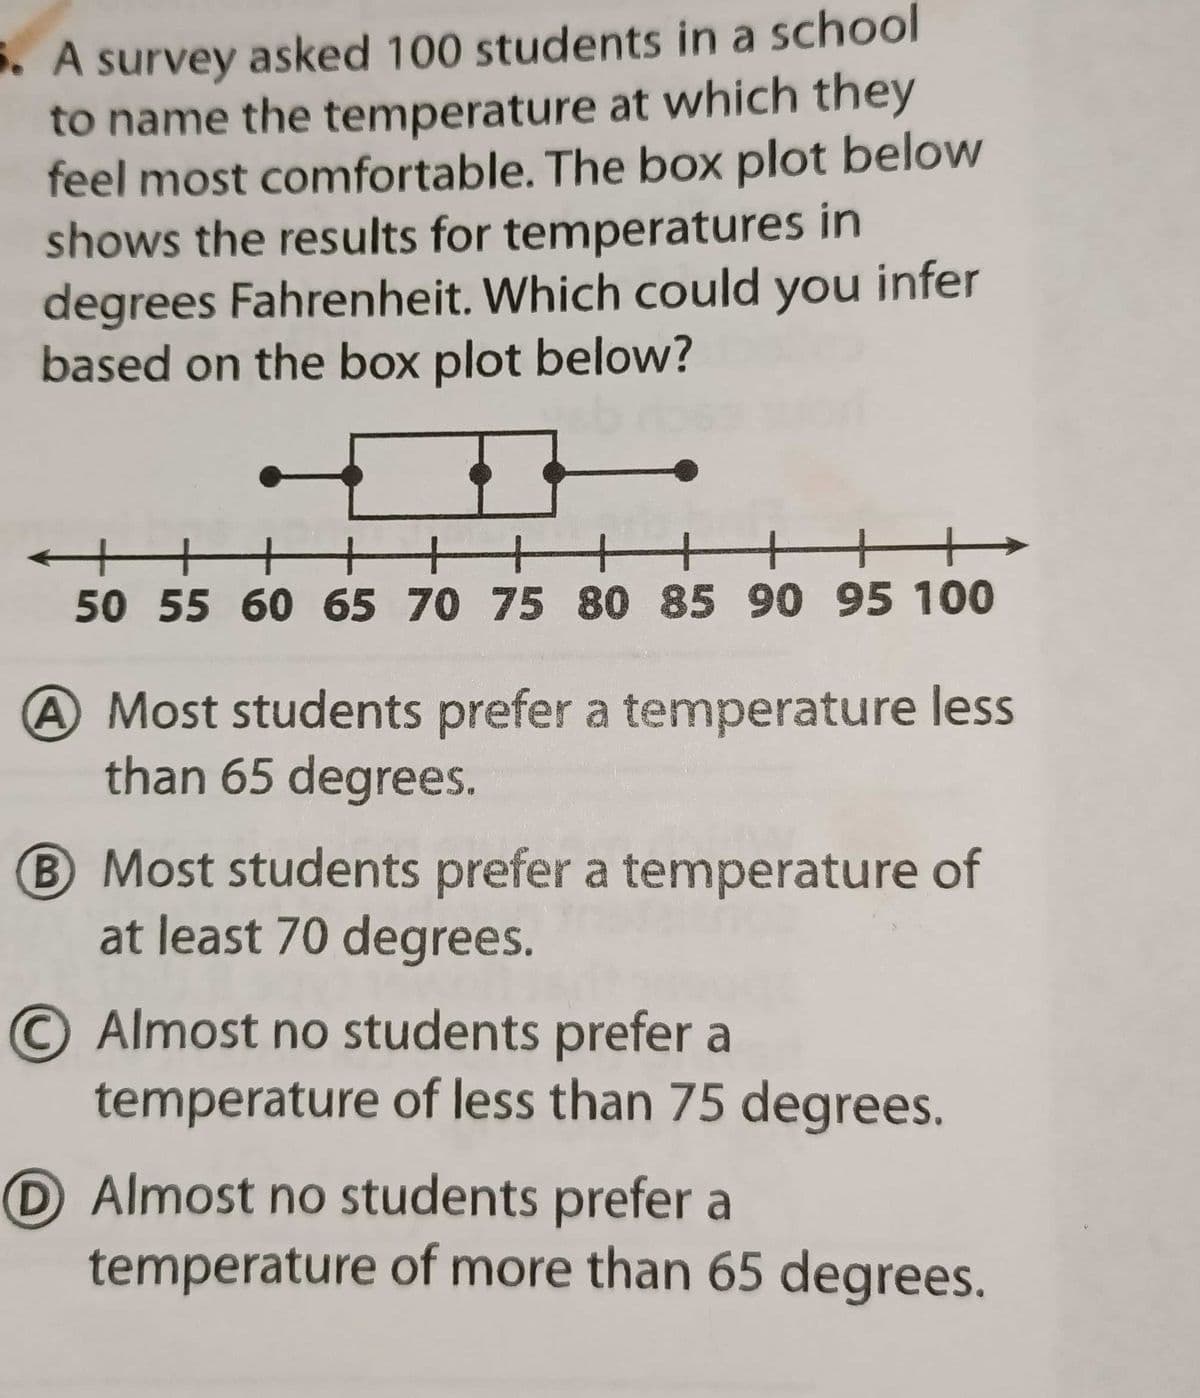 5. A survey asked 100 students in a school
to name the temperature at which they
feel most comfortable. The box plot below
shows the results for temperatures in
degrees Fahrenheit. Which could you infer
based on the box plot below?
+++ ++++ ++
50 55 60 65 70 75 80 85 90 95 100
A Most students prefer a temperature less
than 65 degrees.
B Most students prefer a temperature of
at least 70 degrees.
O Almost no students prefer a
temperature of less than 75 degrees.
D Almost no students prefer a
temperature of more than 65 degrees.
